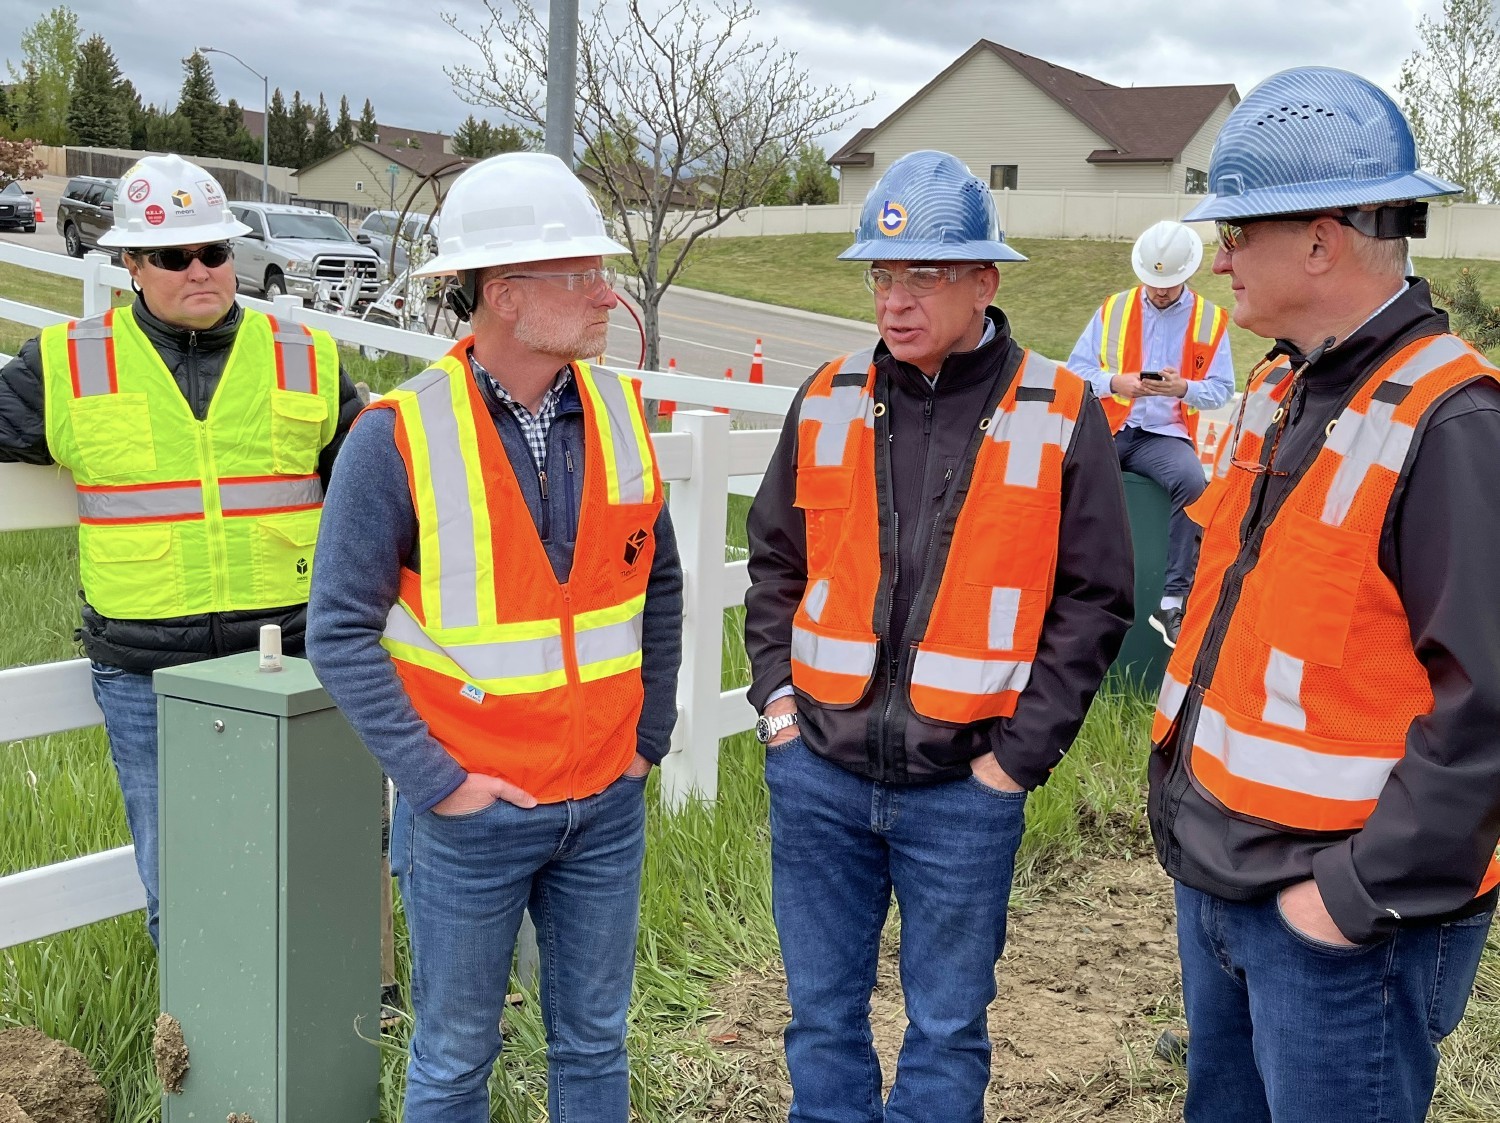 Leaders discussed Bluepeak's plans for expansion with FCC Commissioner Brendan Carr during his visit to Casper, Wyoming.